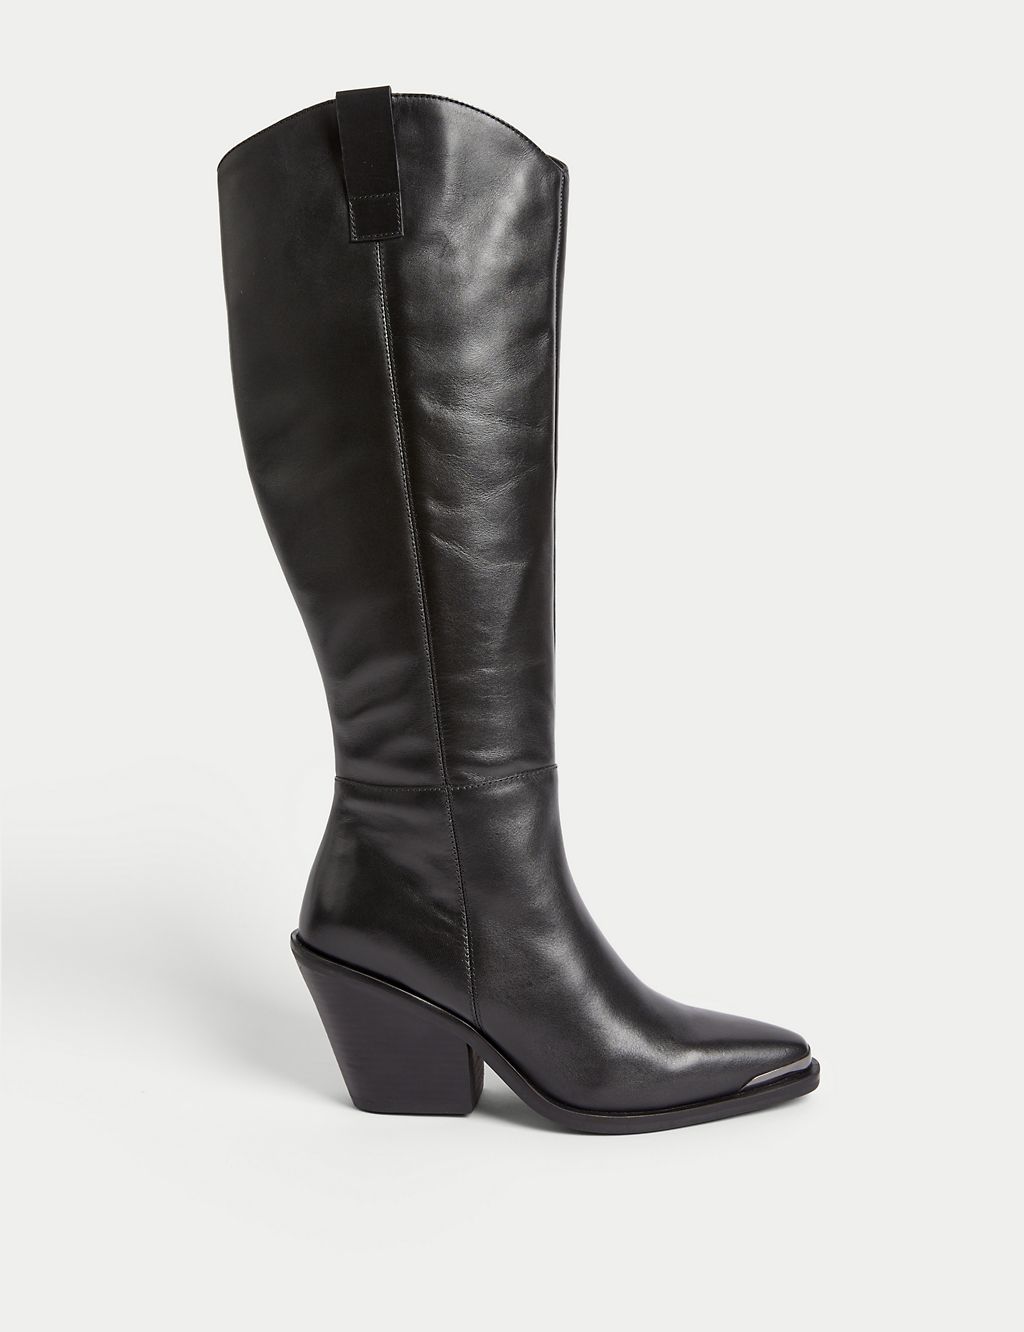 Leather Cow Boy Block Heel Knee High Boots | M&S Collection | M&S